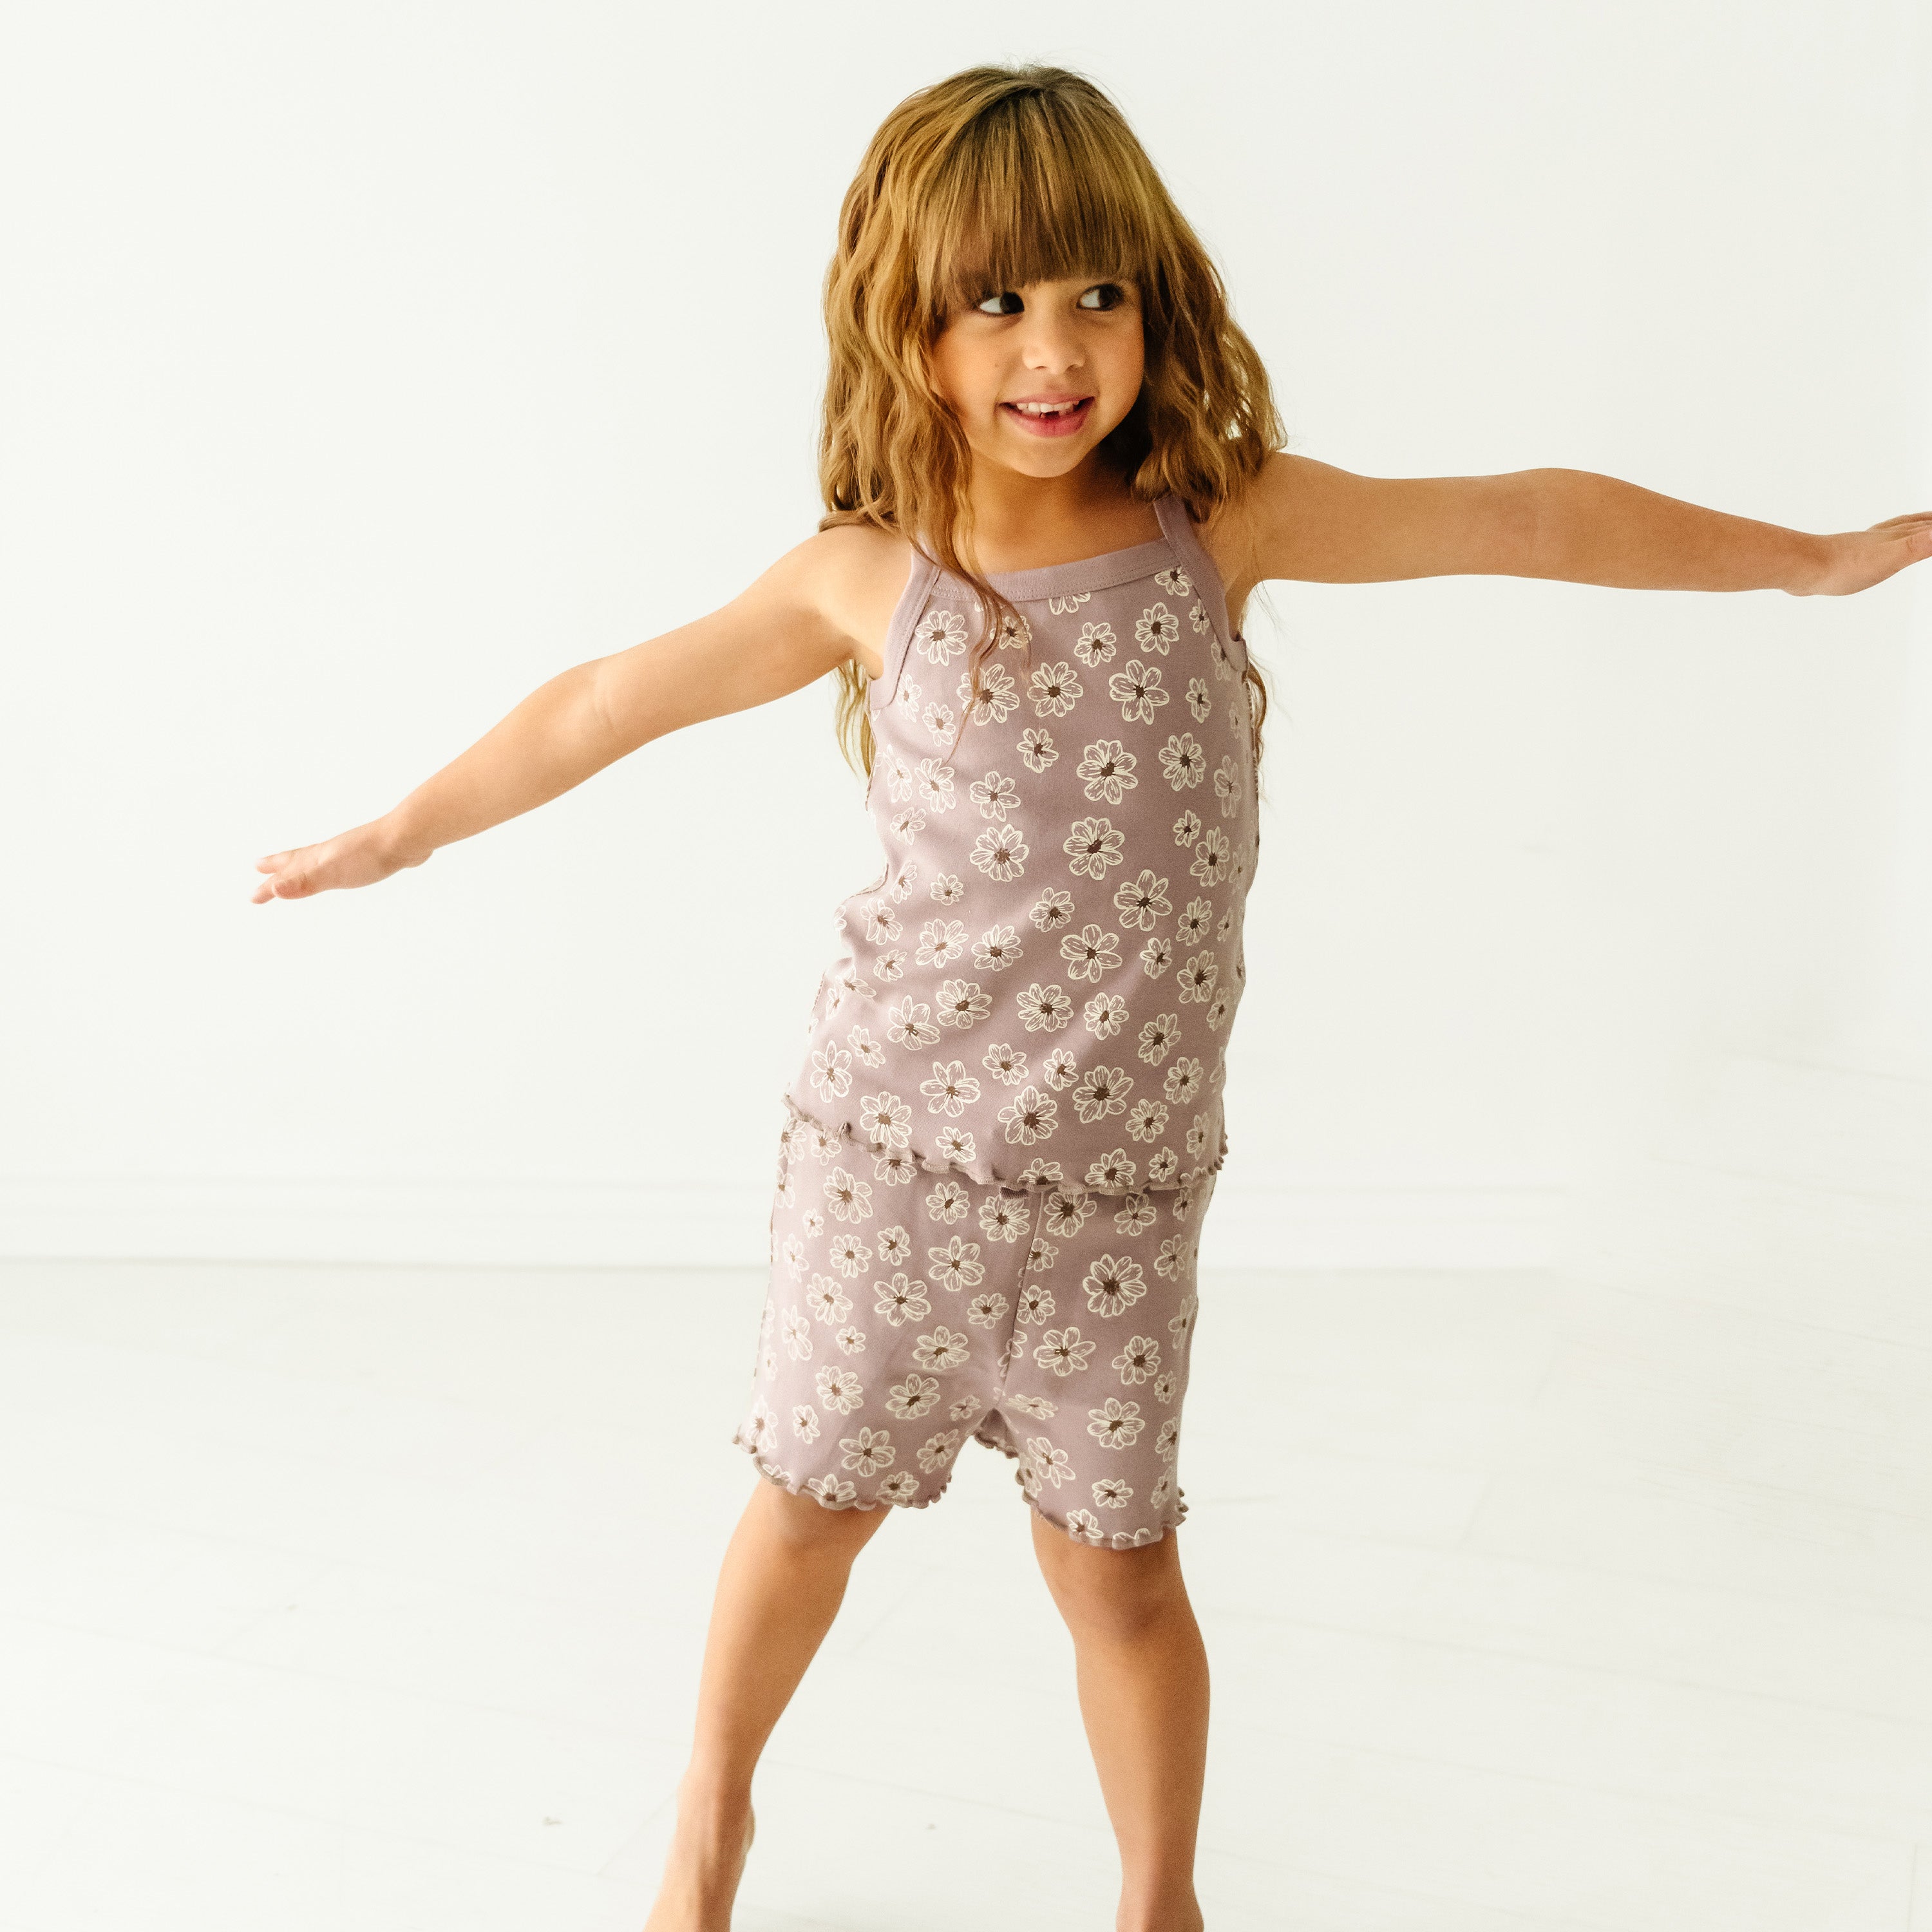 A young girl with bangs, wearing a Makemake Organics Organic Spaghetti Top & Shorts Set - Daisies, smiles and stretches out her arms while balancing in a playful pose against a white background.